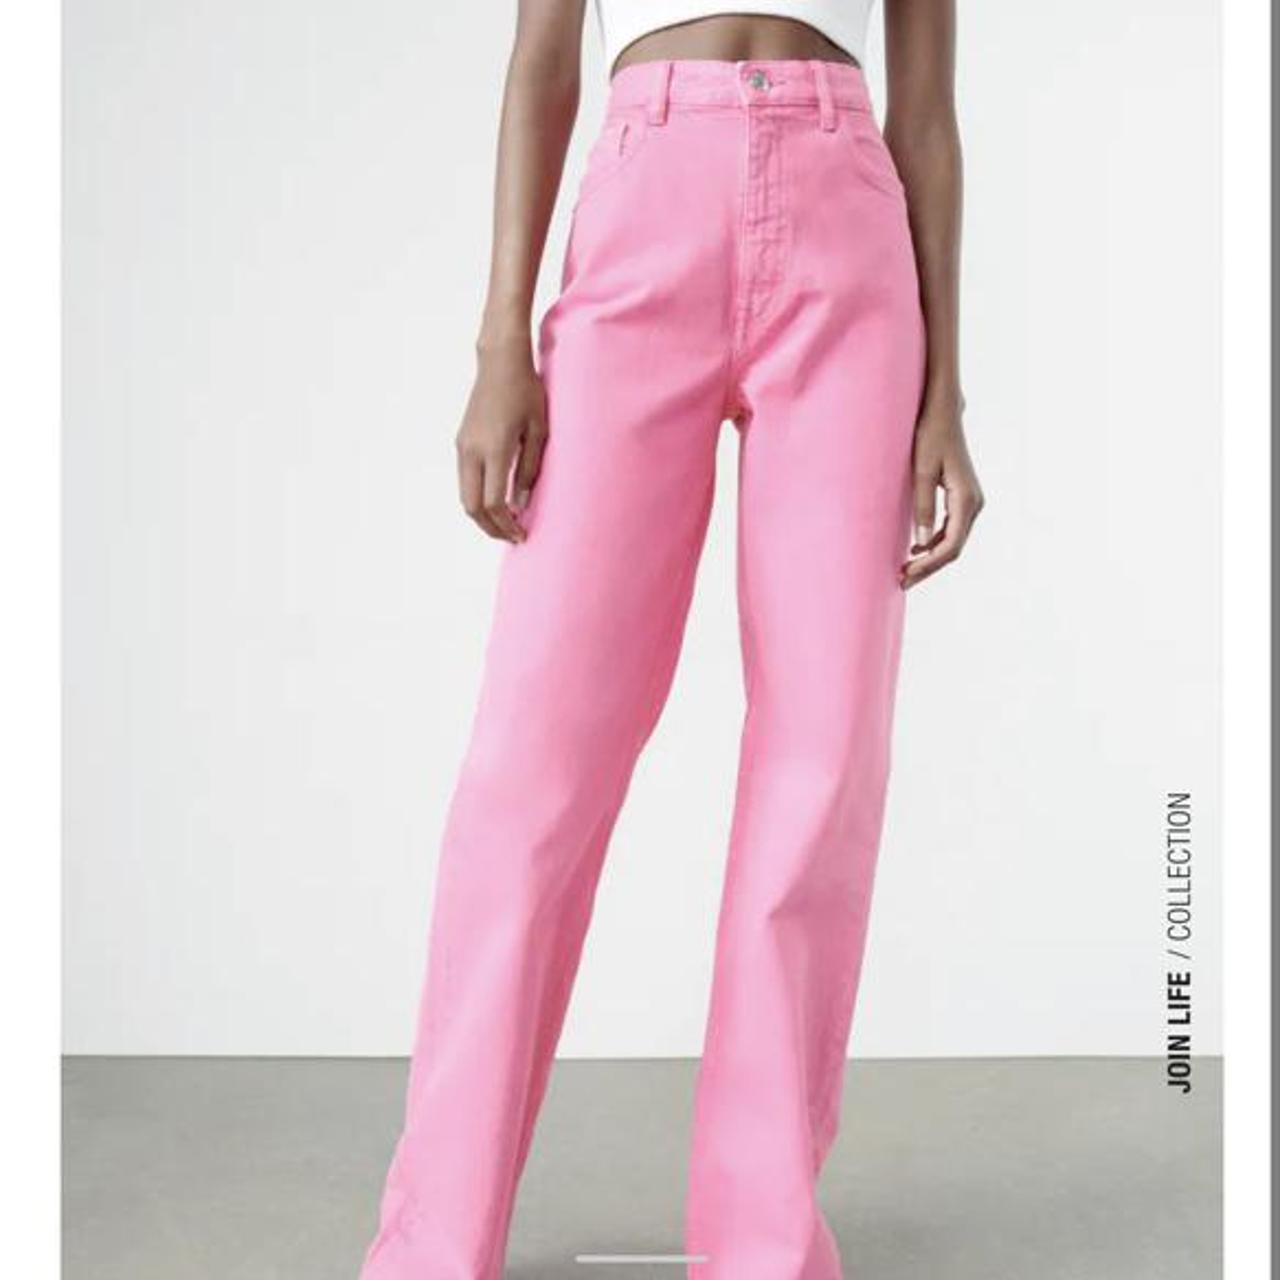 ZARA pink pants! bought last year and never worn :) - Depop